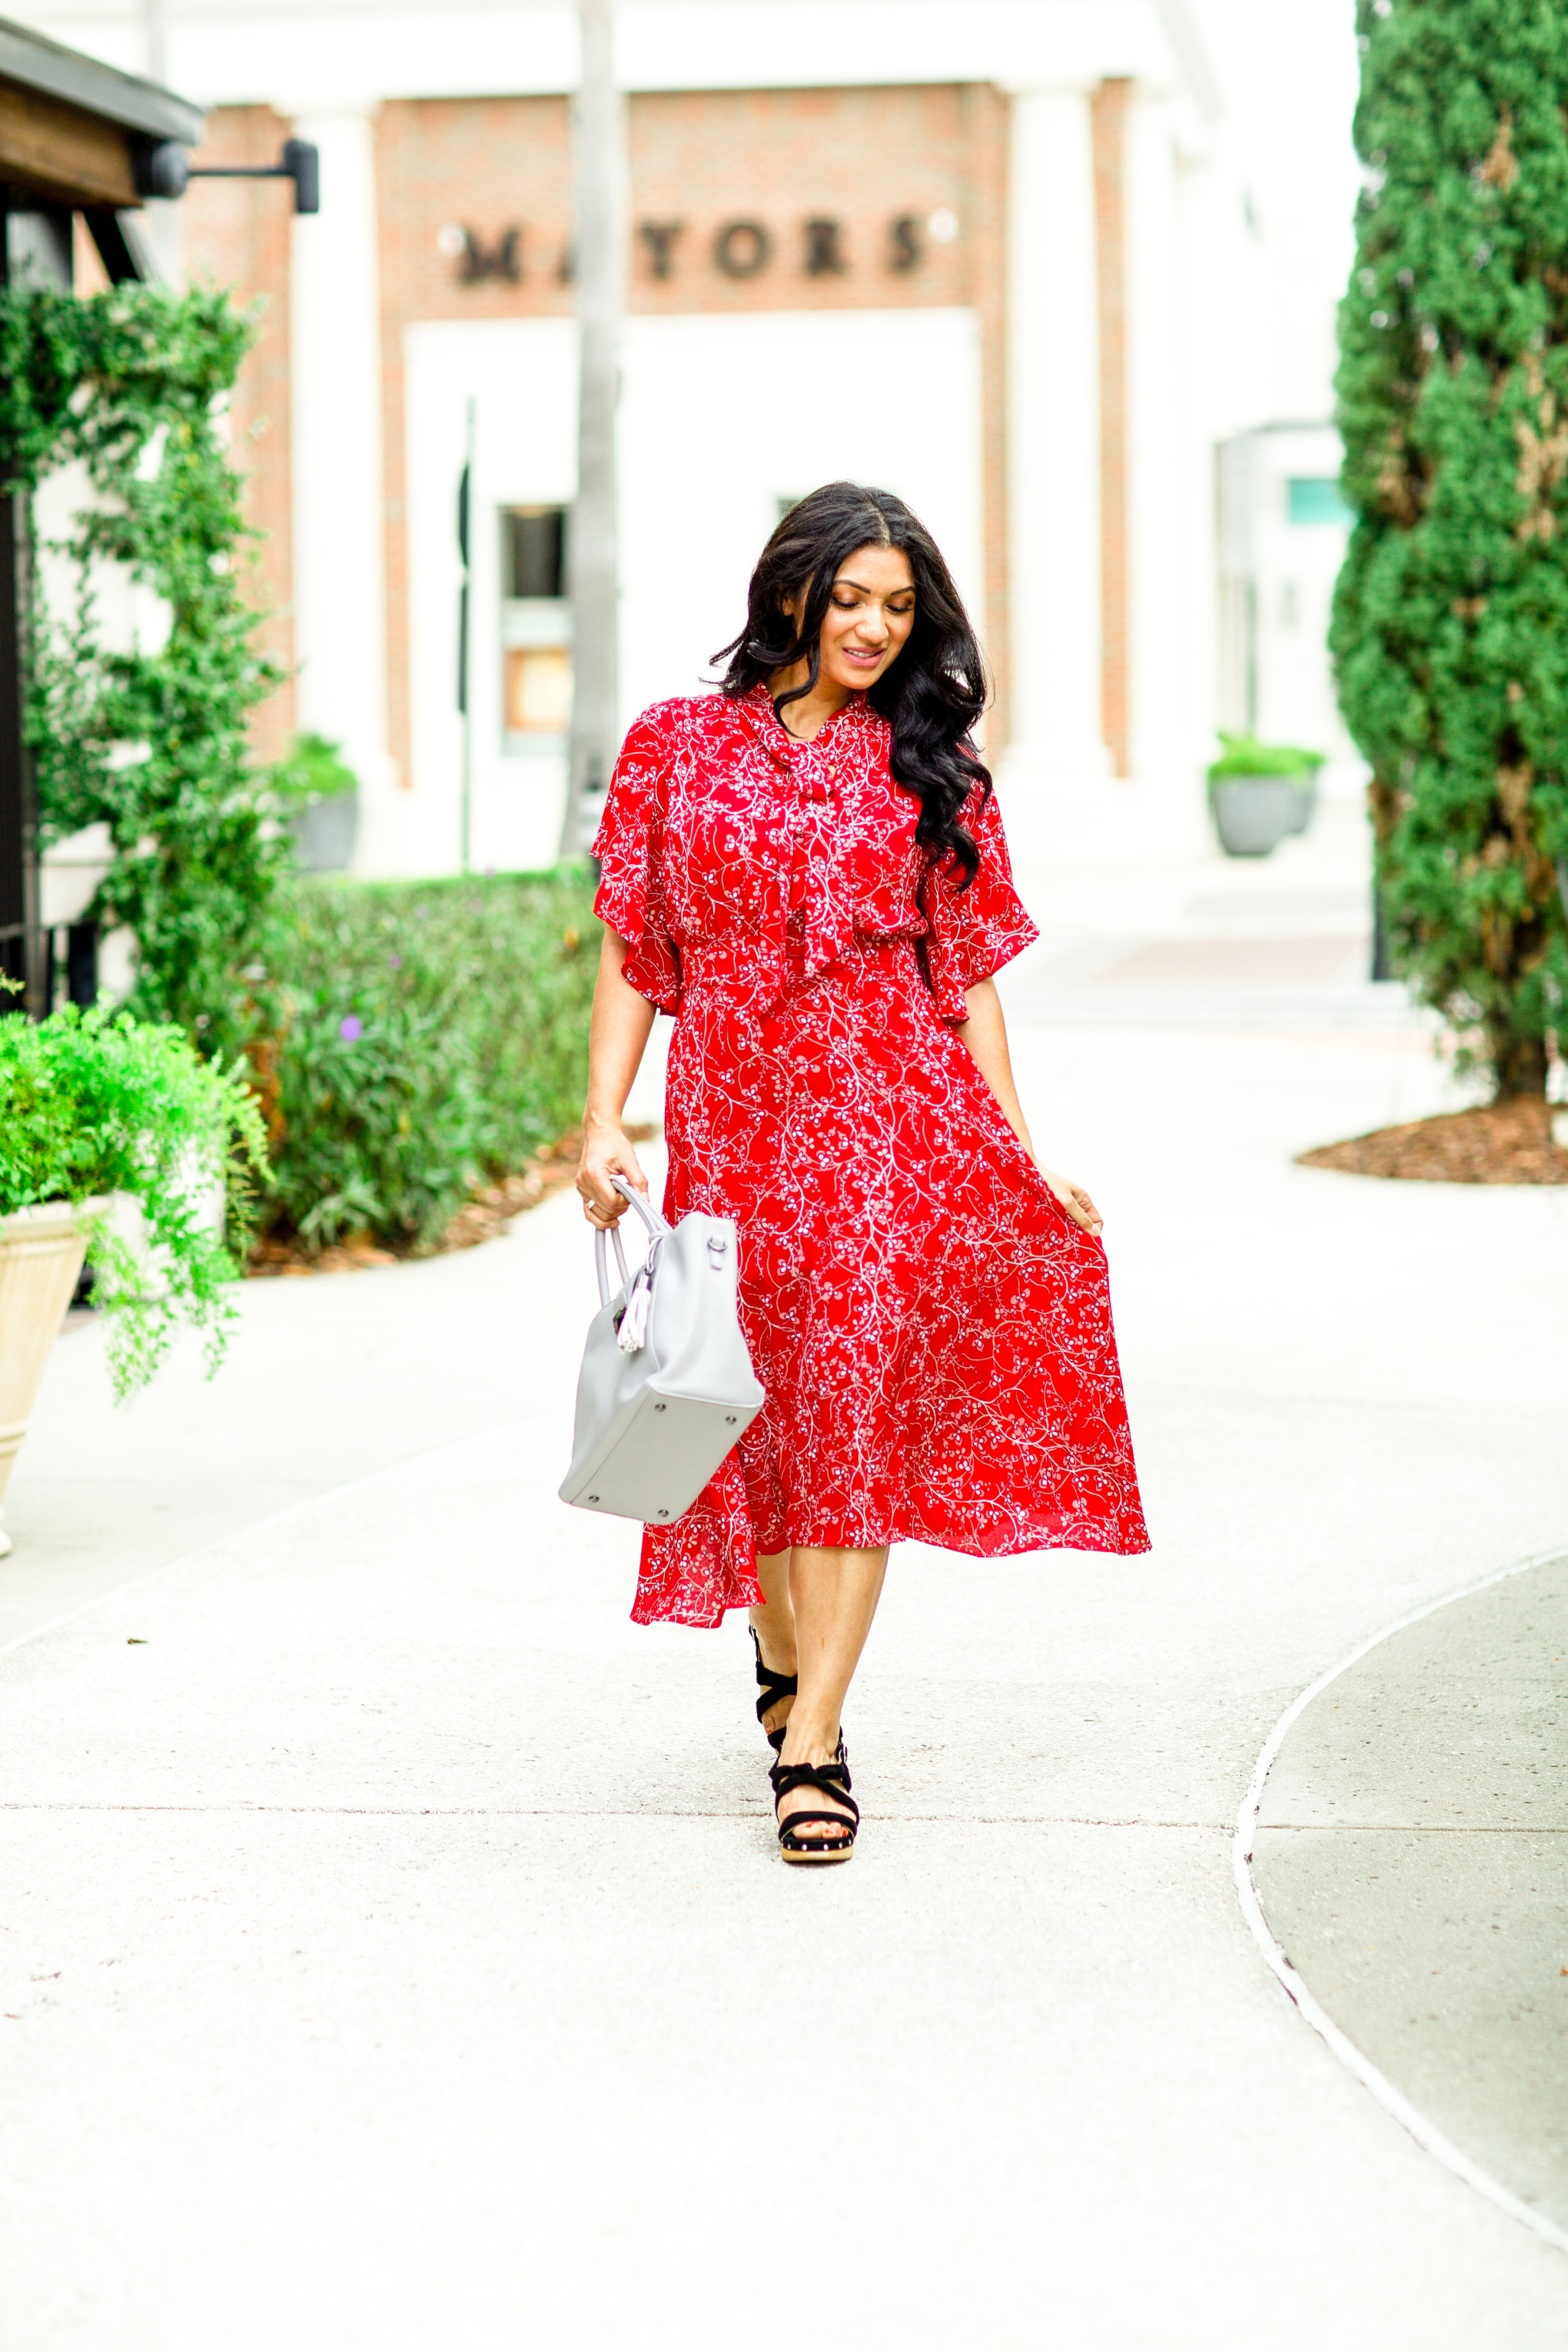 Looking for the perfect maxi dress this summer? Orange County Blogger Debbie Savage is sharing her favorite maxi dress from Max Studio here!